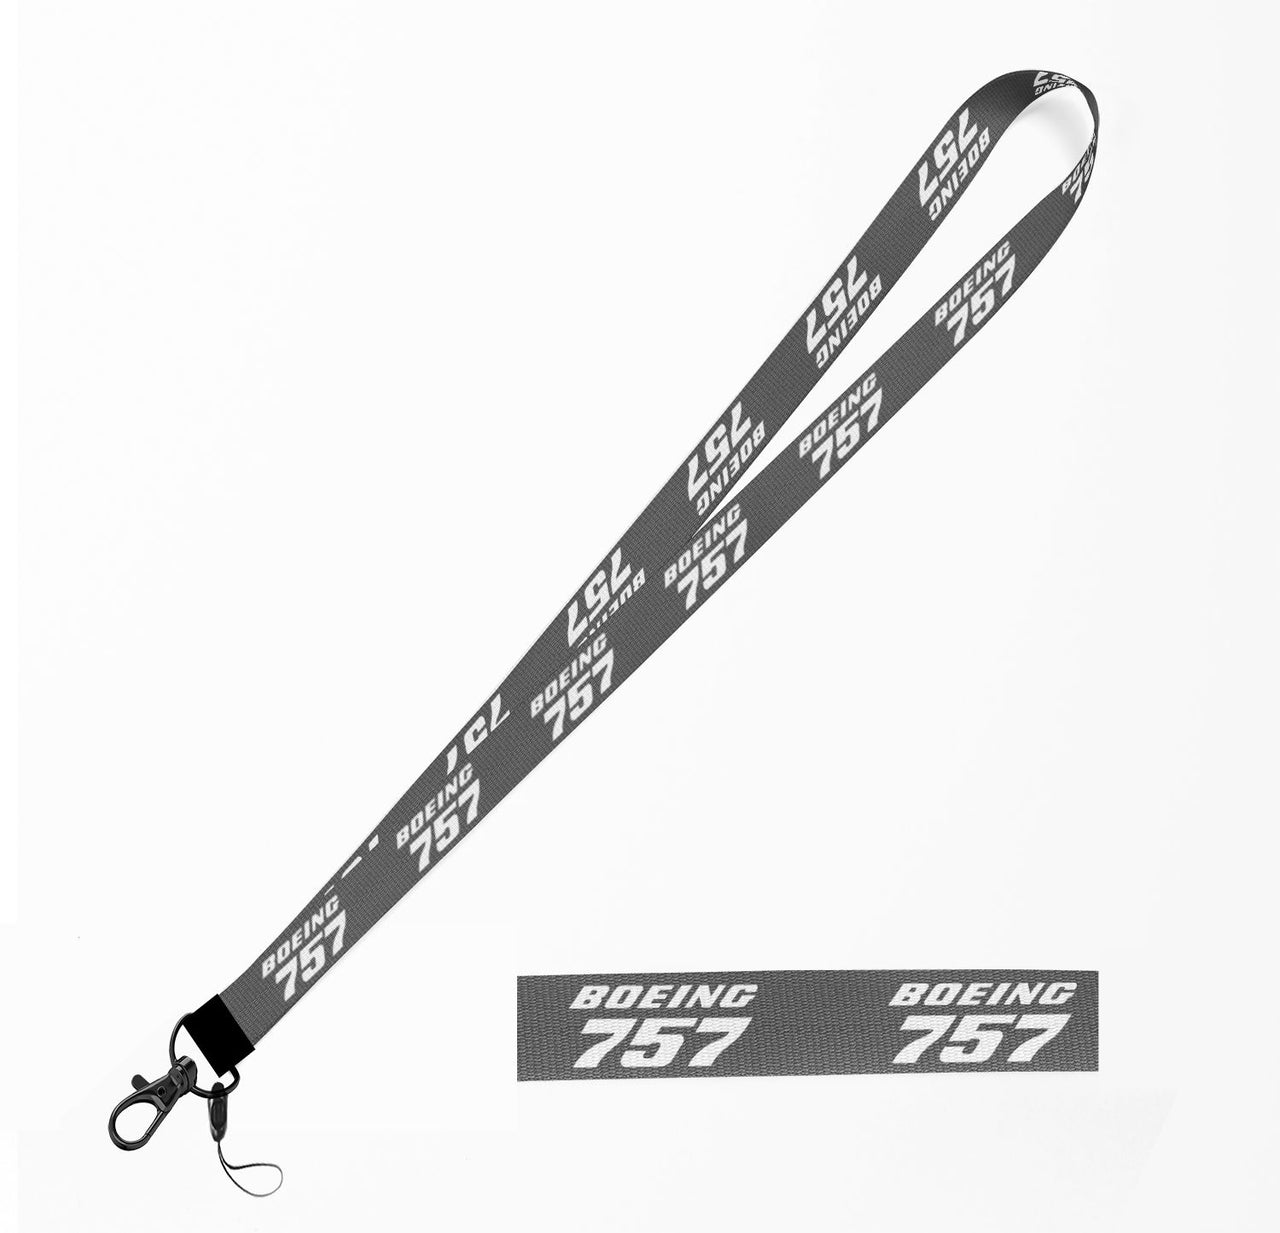 Boeing 757 & Text Designed Lanyard & ID Holders